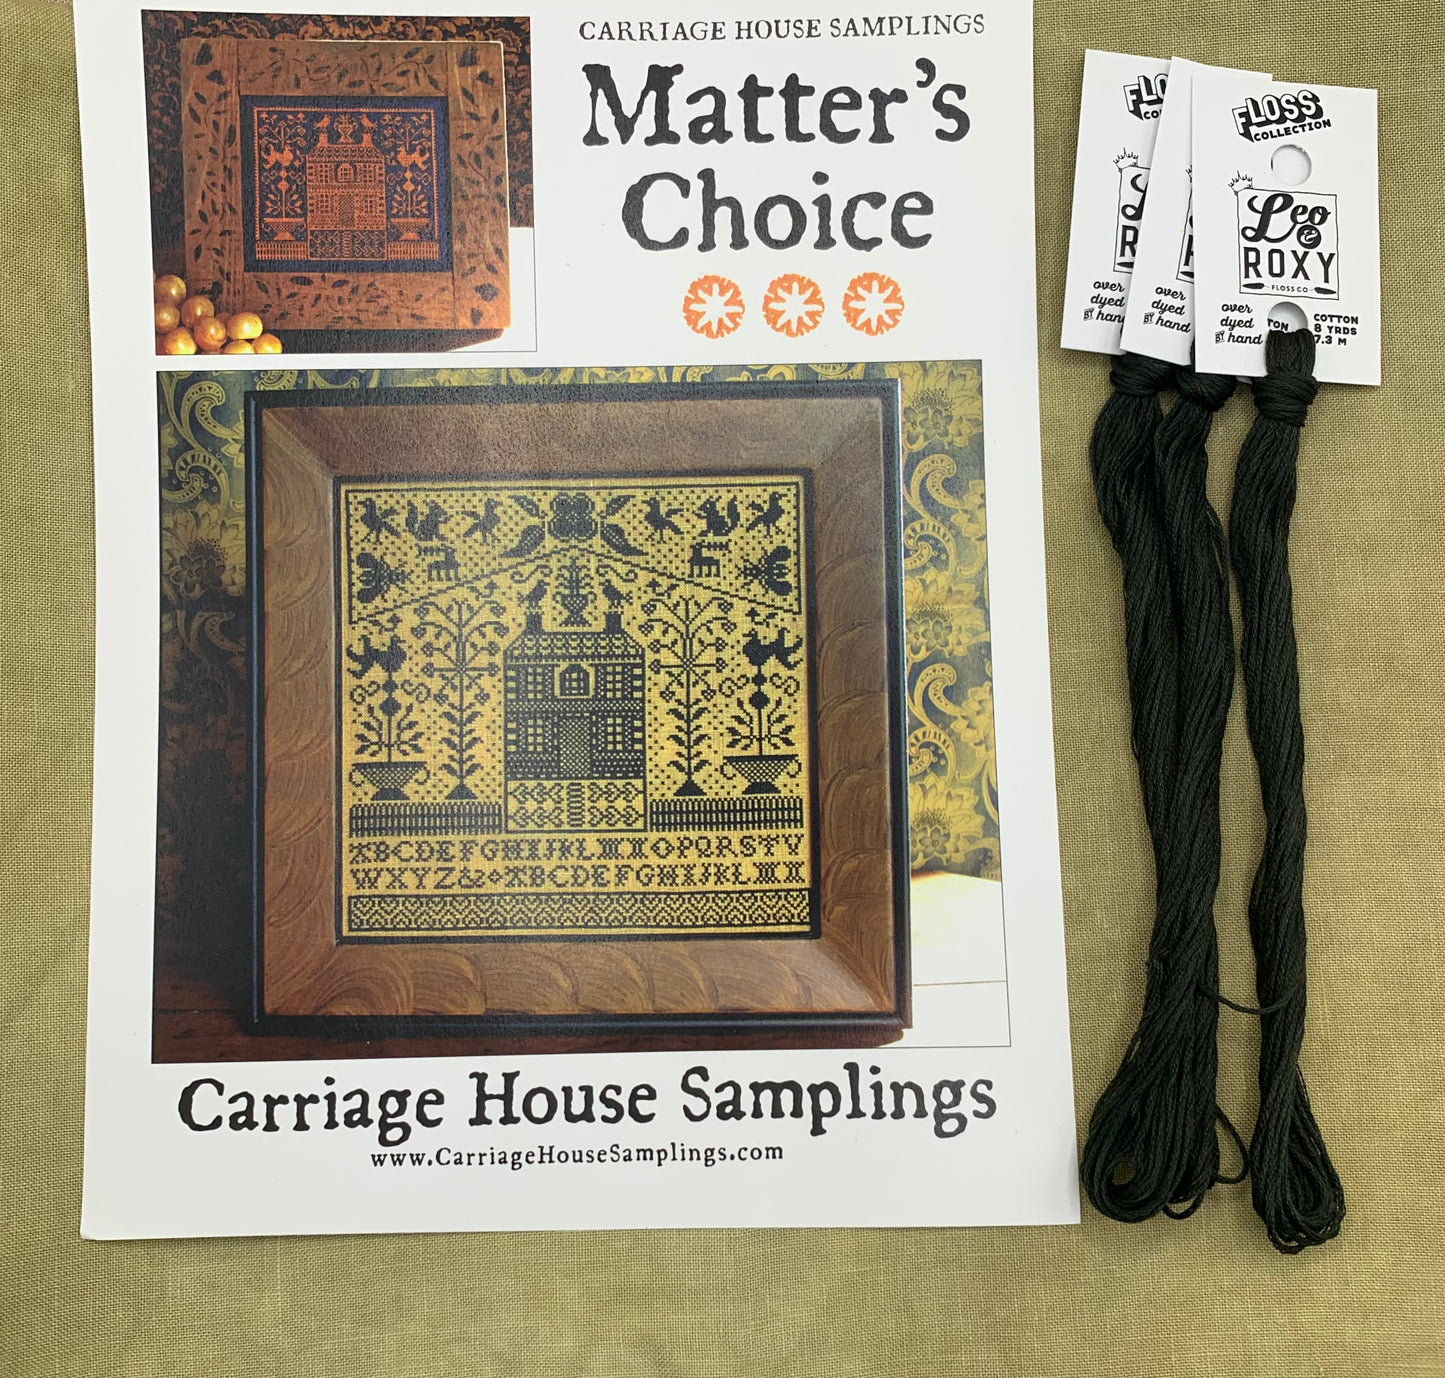 Carriage House Samplings Matter's Choice Kit - Booklet Chart, Roxy Floss Co 40ct Linen, and Roxy Floss